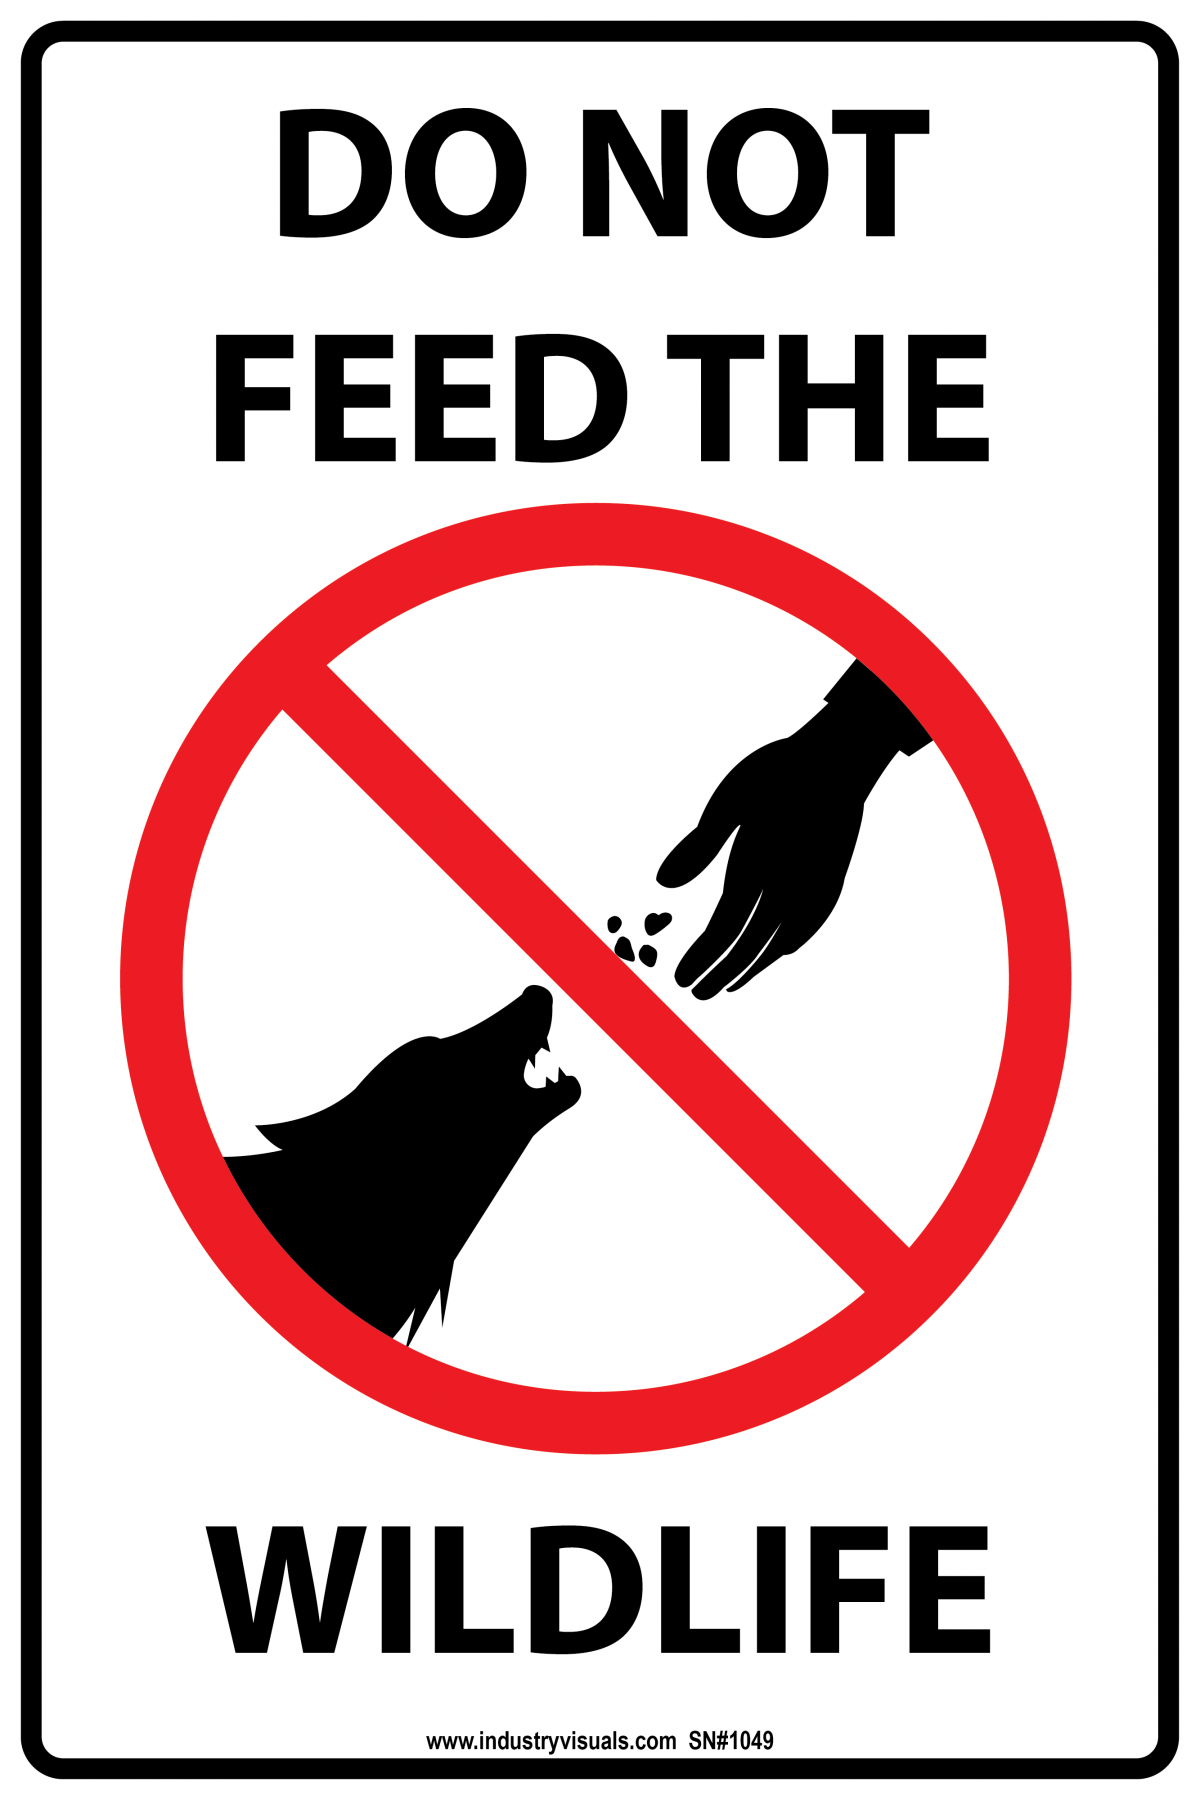 do-not-feed-the-wildlife-industry-visuals